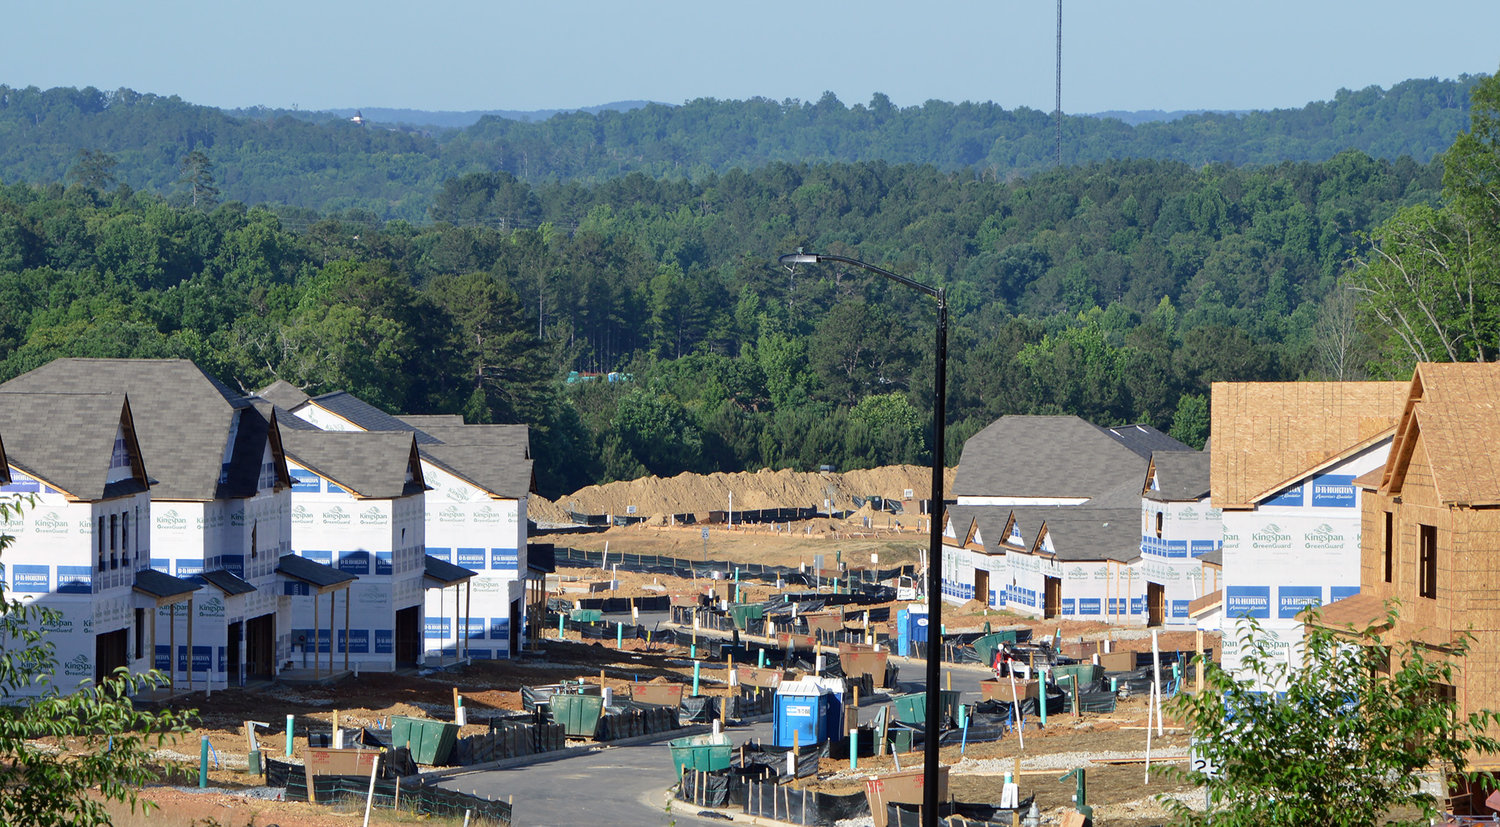 Houses under construction line the street of a new subdivision in Dallas, Ga., June 10, 2022. (Index/Henry Durand)